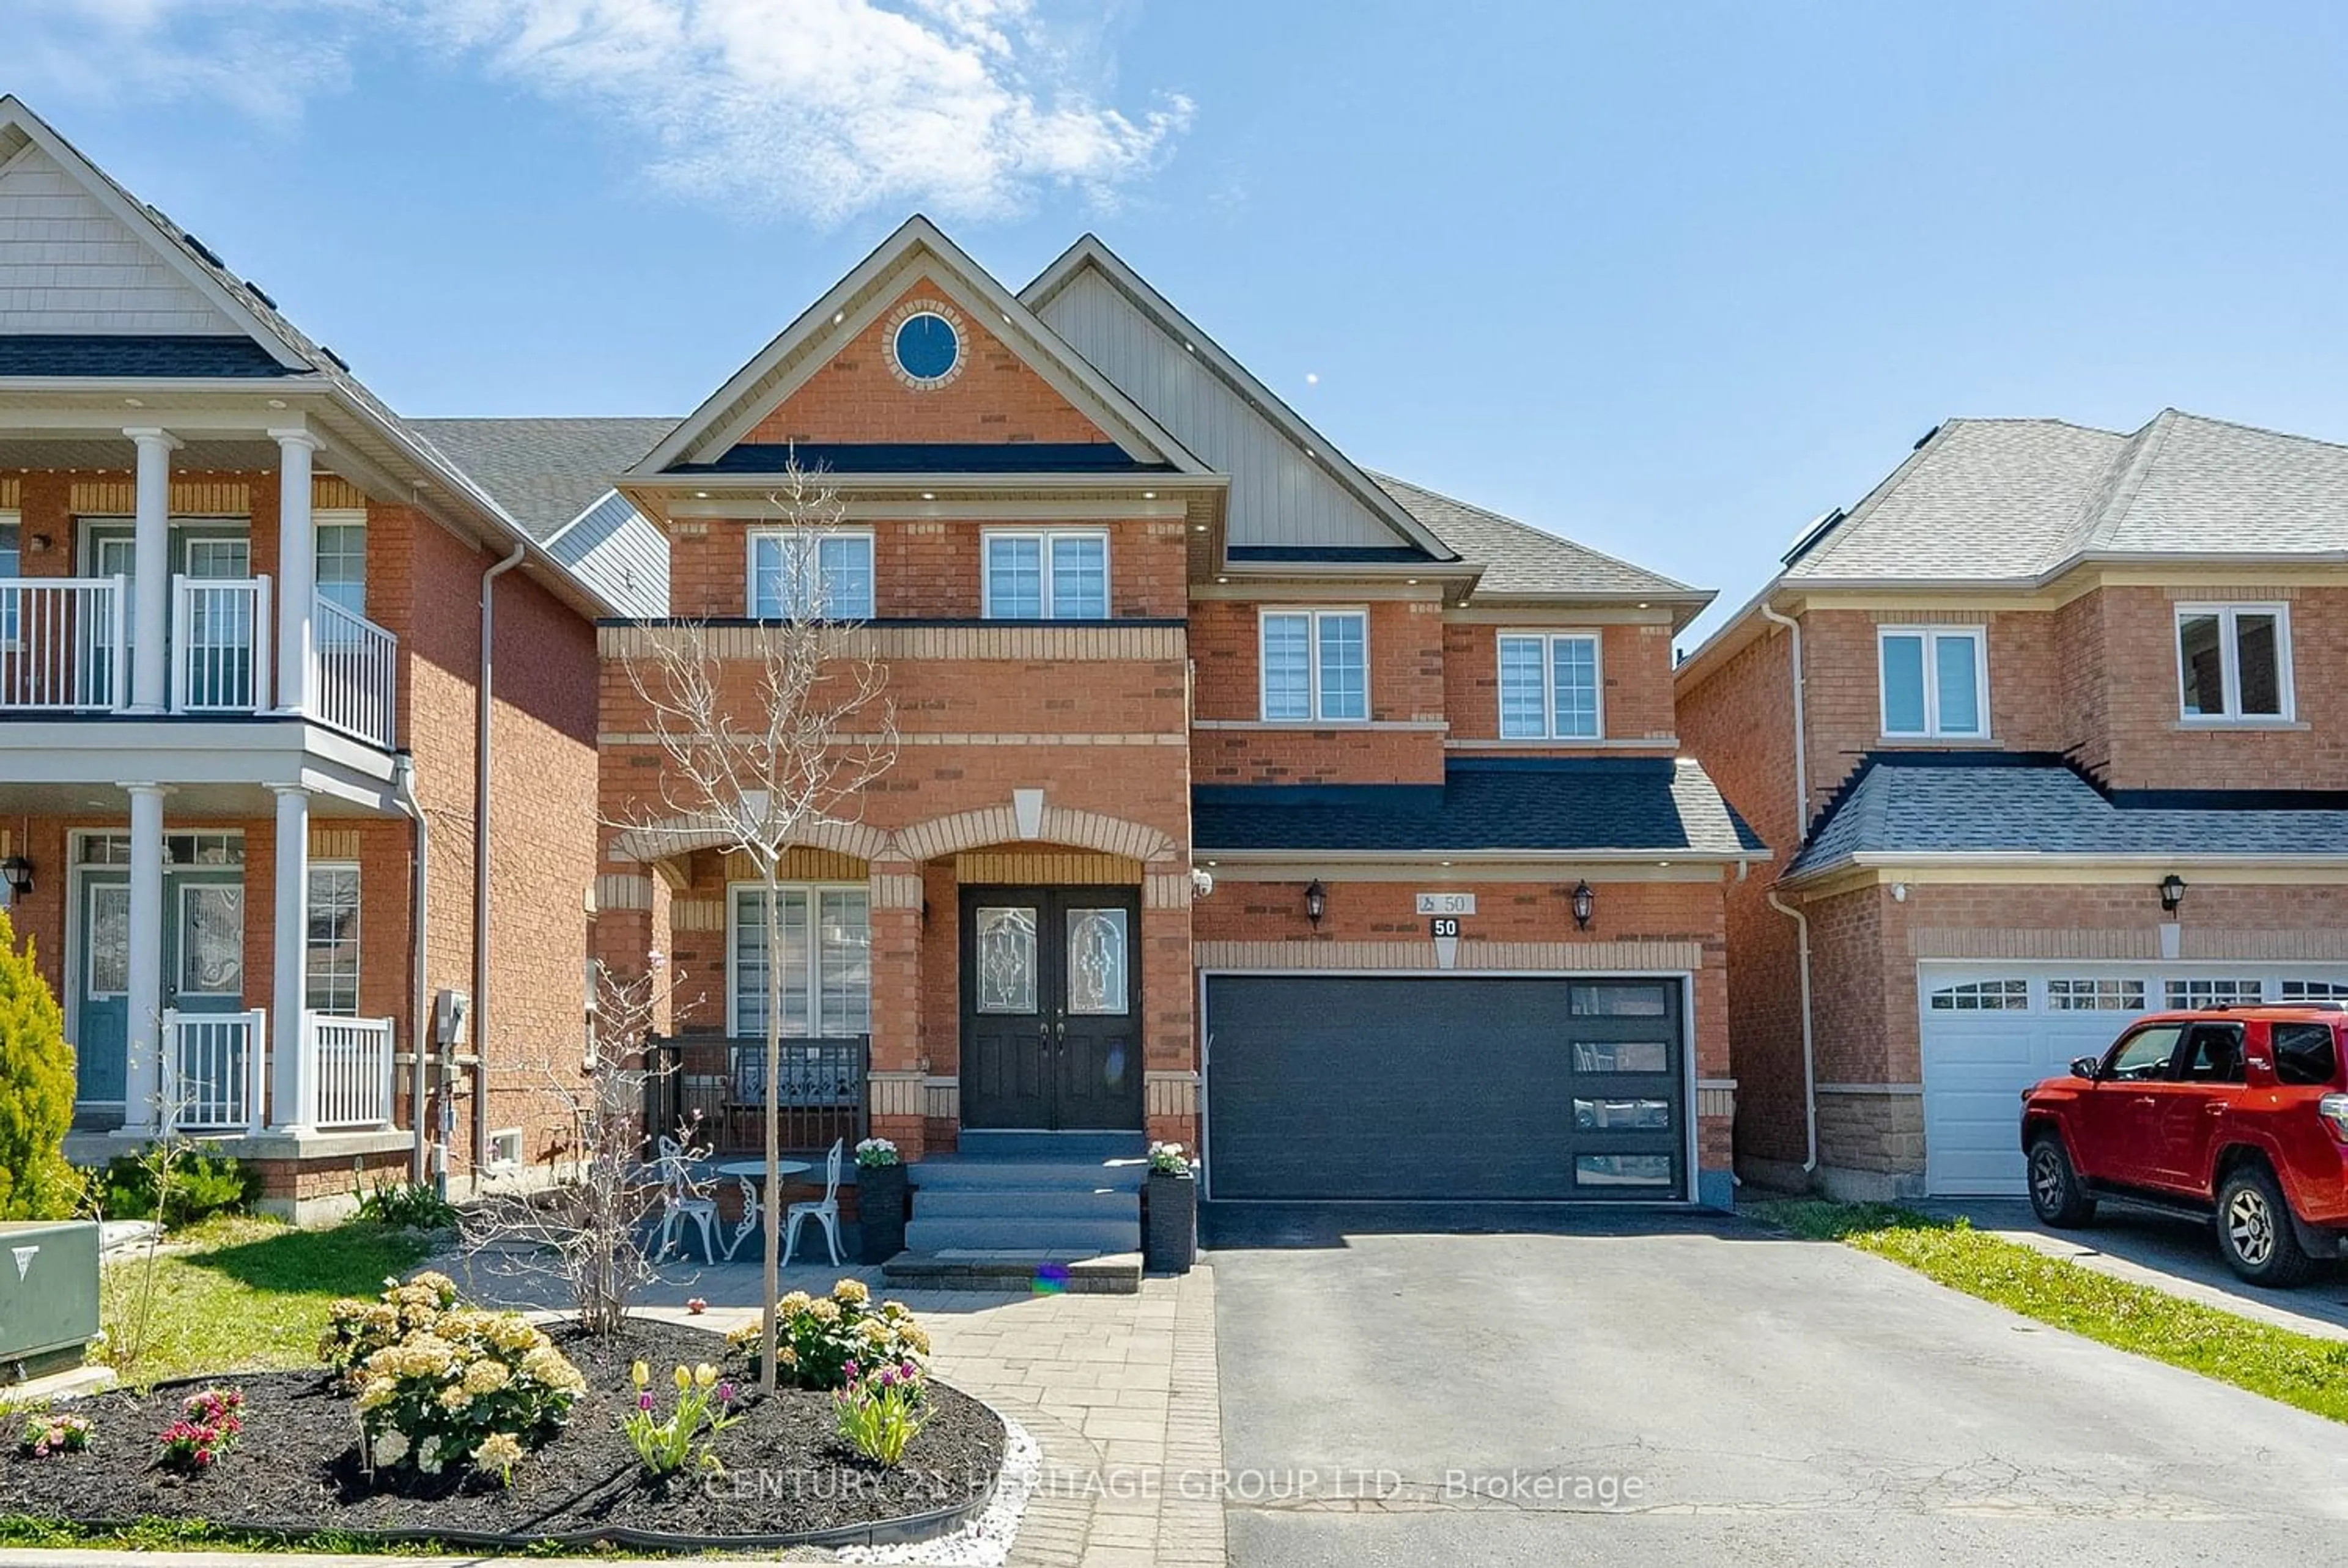 Home with brick exterior material for 50 Trish Dr, Richmond Hill Ontario L4E 5C4